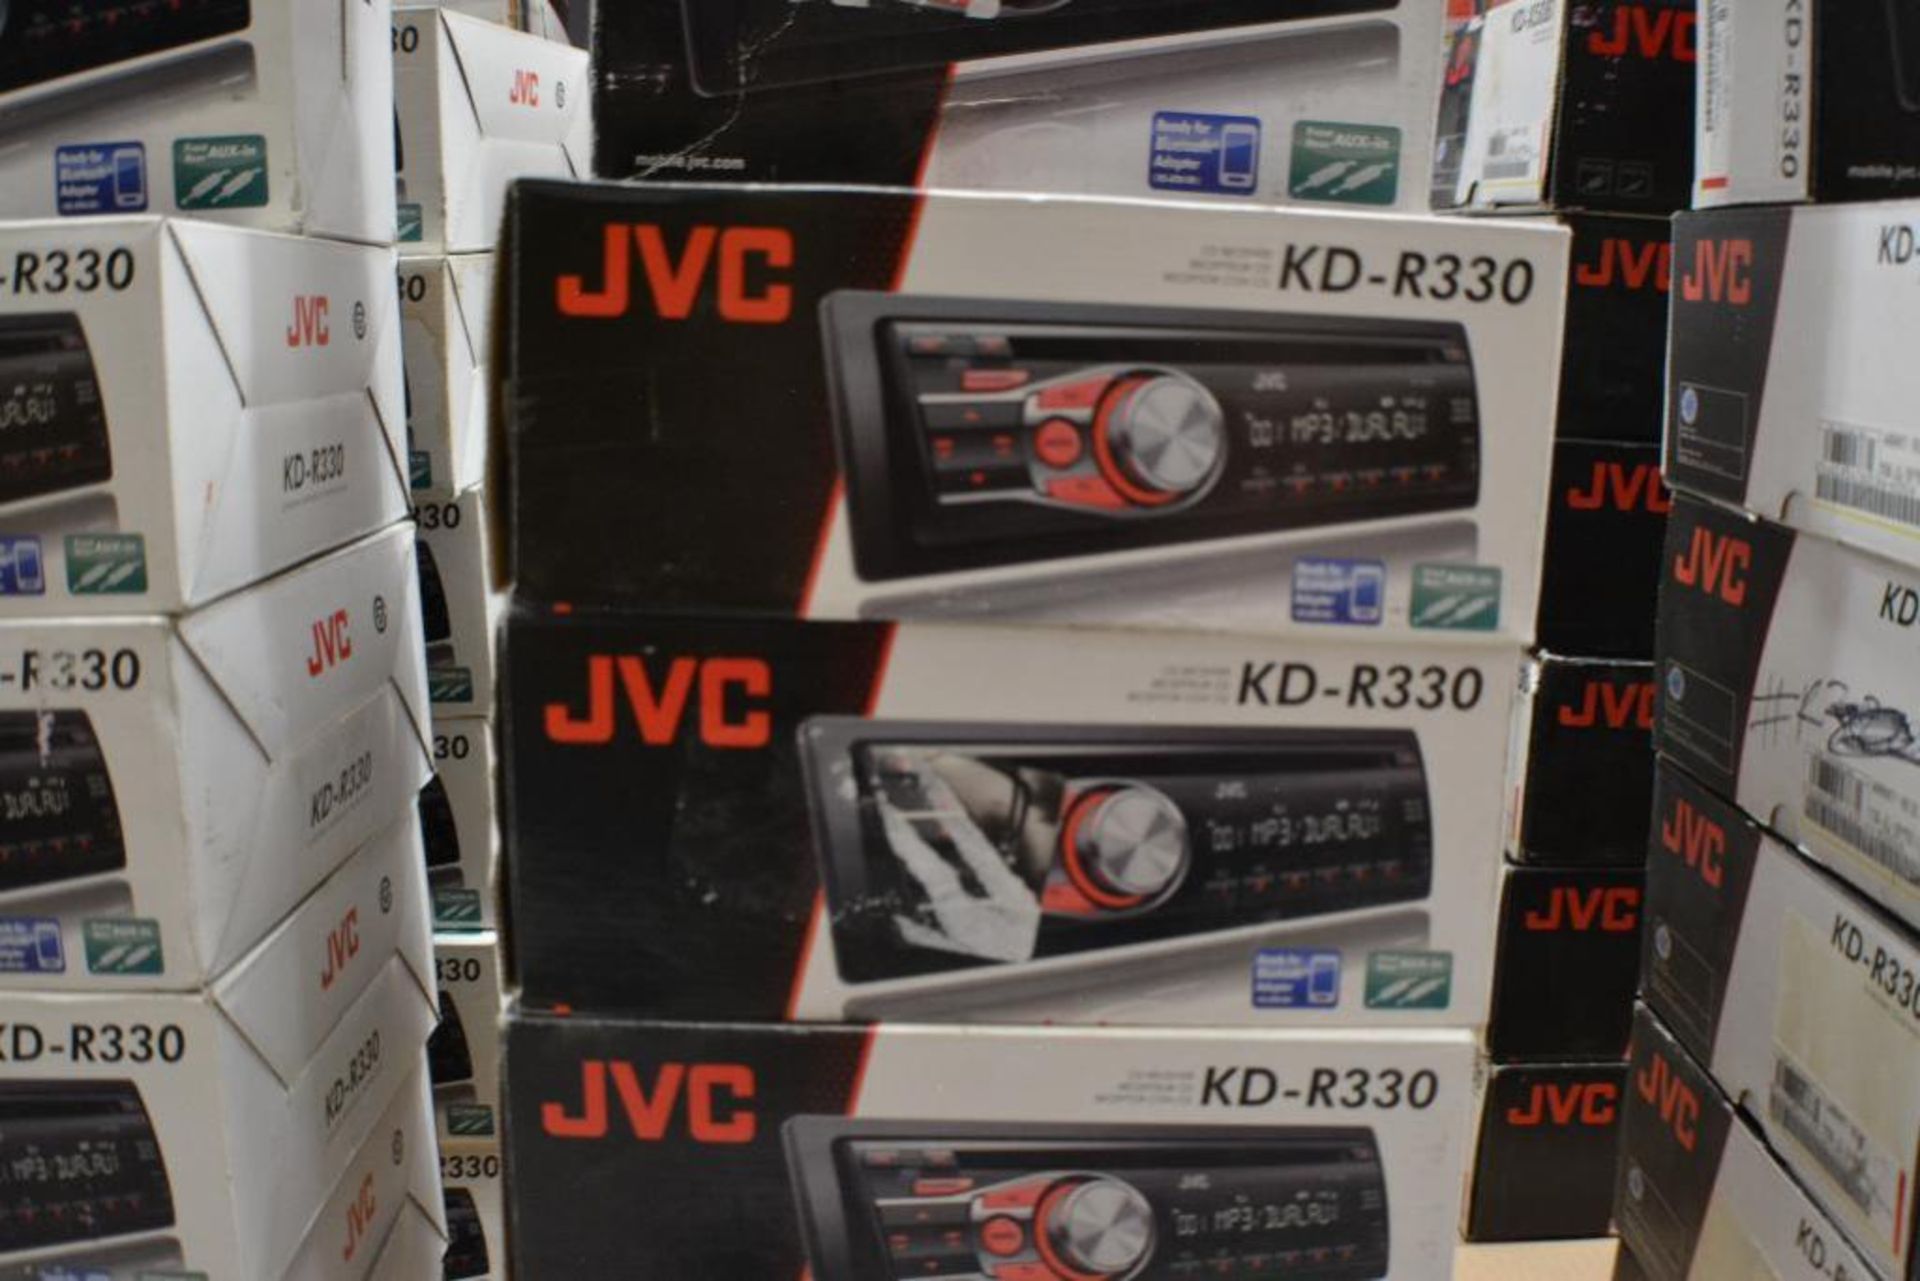 JVC Car Stereo Model KD-R330 Single-DIN Car Stereo w/ Dual Aux Inputs, 3-Band Equalizer & 6 Station - Image 2 of 2